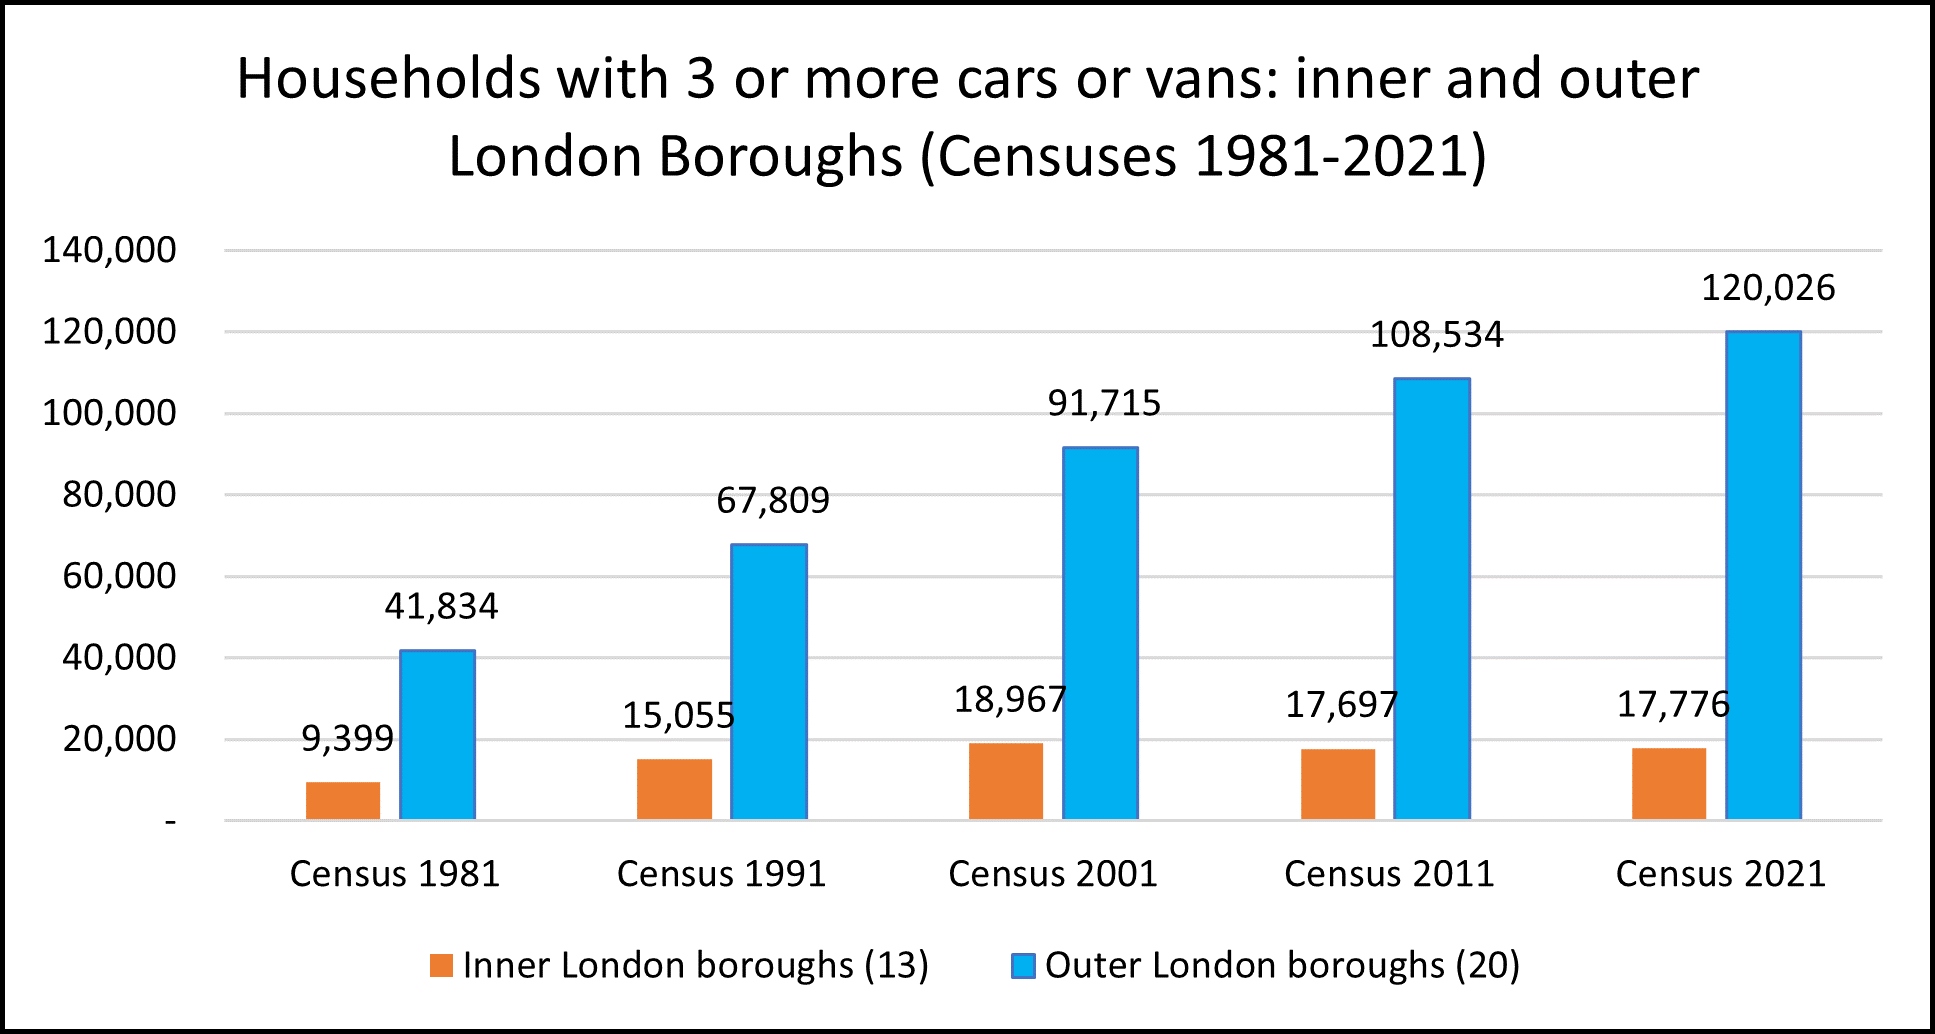 Chart showing households with 3 or more vehicles 1981-2021